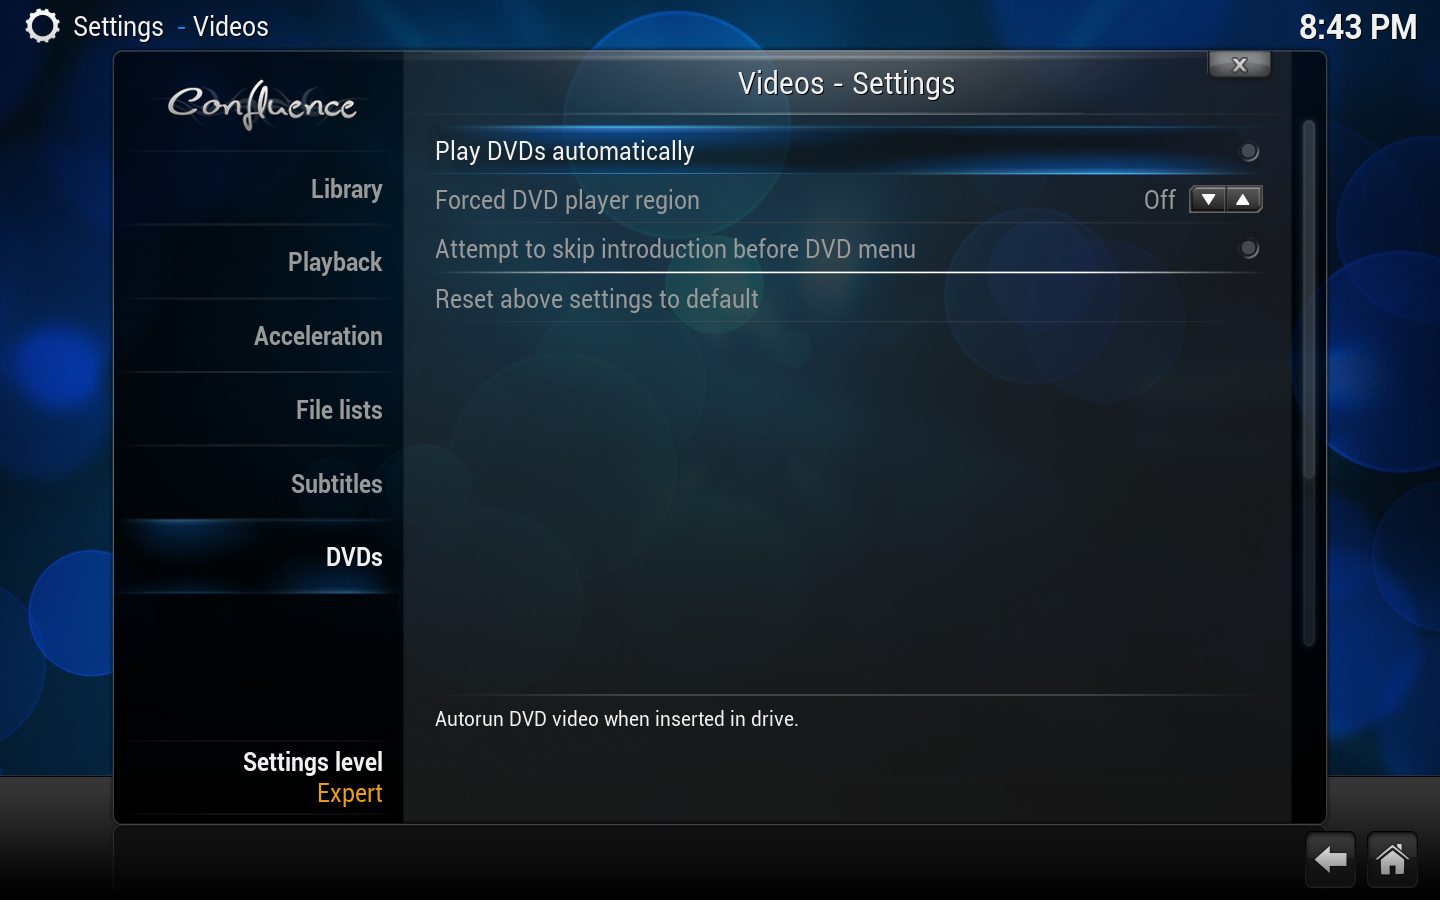 Settings.videos.dvds.png